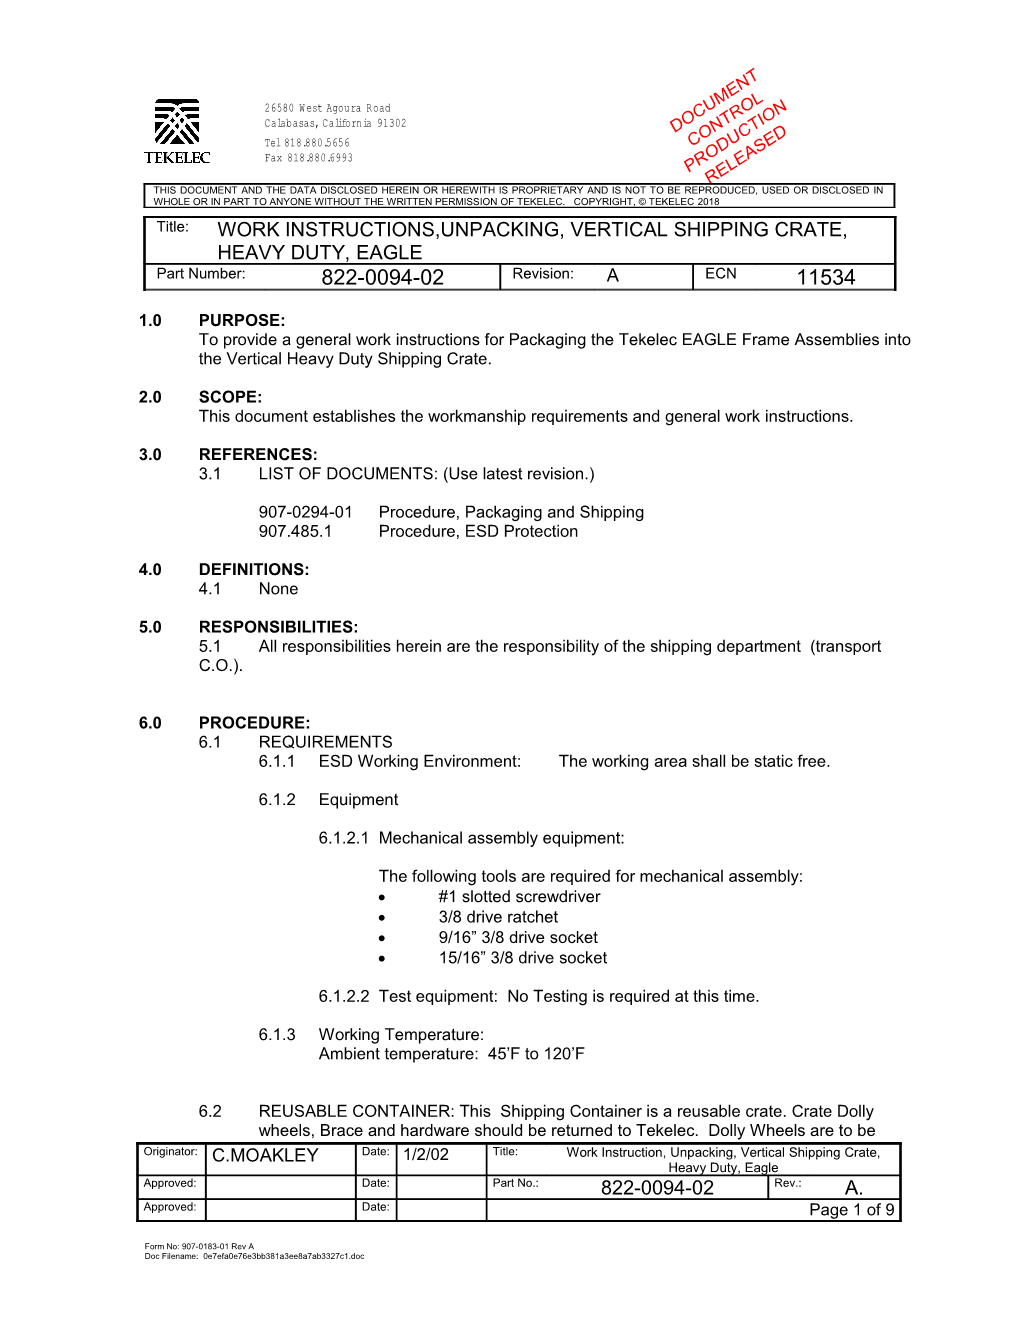 This Document Establishes the Workmanship Requirements and General Work Instructions